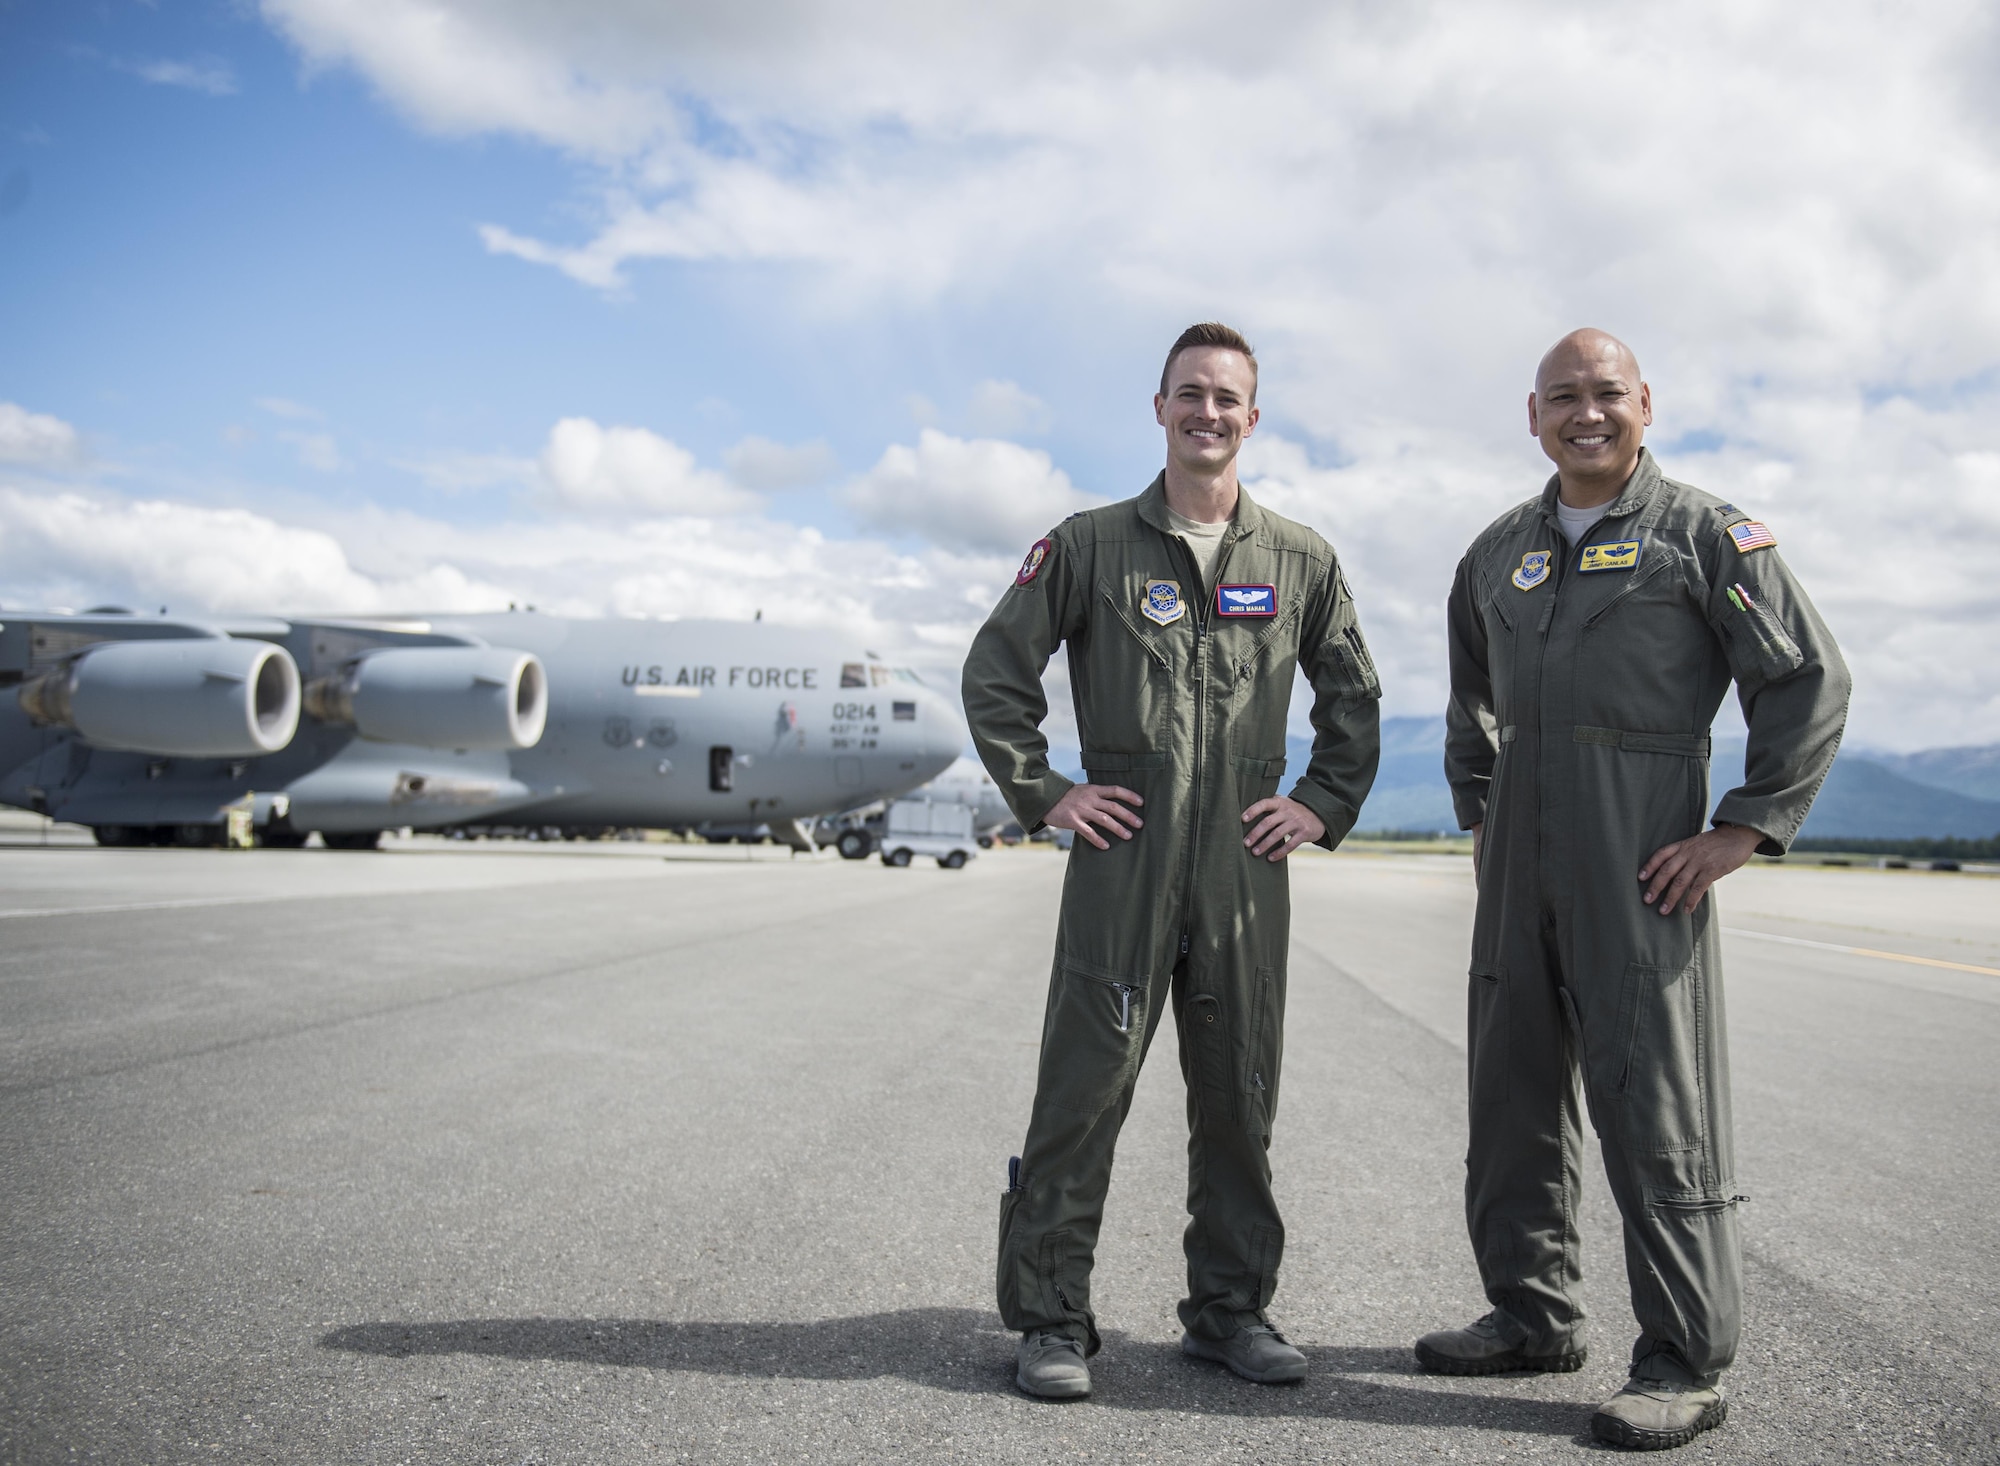 Capt. Chris Mahan (left), pilot, and Col. Jimmy Canlas (right), commander, 437th Airlift Wing pose in front of a U.S. Air Force C-17 from Joint Base Charleston, S.C., on the ramp at Joint Base Elmendorf-Richardson, Alaska, July 9, 2017 after landing to participate in and provide airlift support for Exercise Talisman Saber 2017. The purpose of TS17 is to improve U.S.-Australian combat readiness, increase interoperability, maximize combined training opportunities and conduct maritime prepositioning and logistics operations in the Pacific. TS17 also demonstrates U.S. commitment to its key ally and the overarching security framework in the Indo Asian Pacific region.